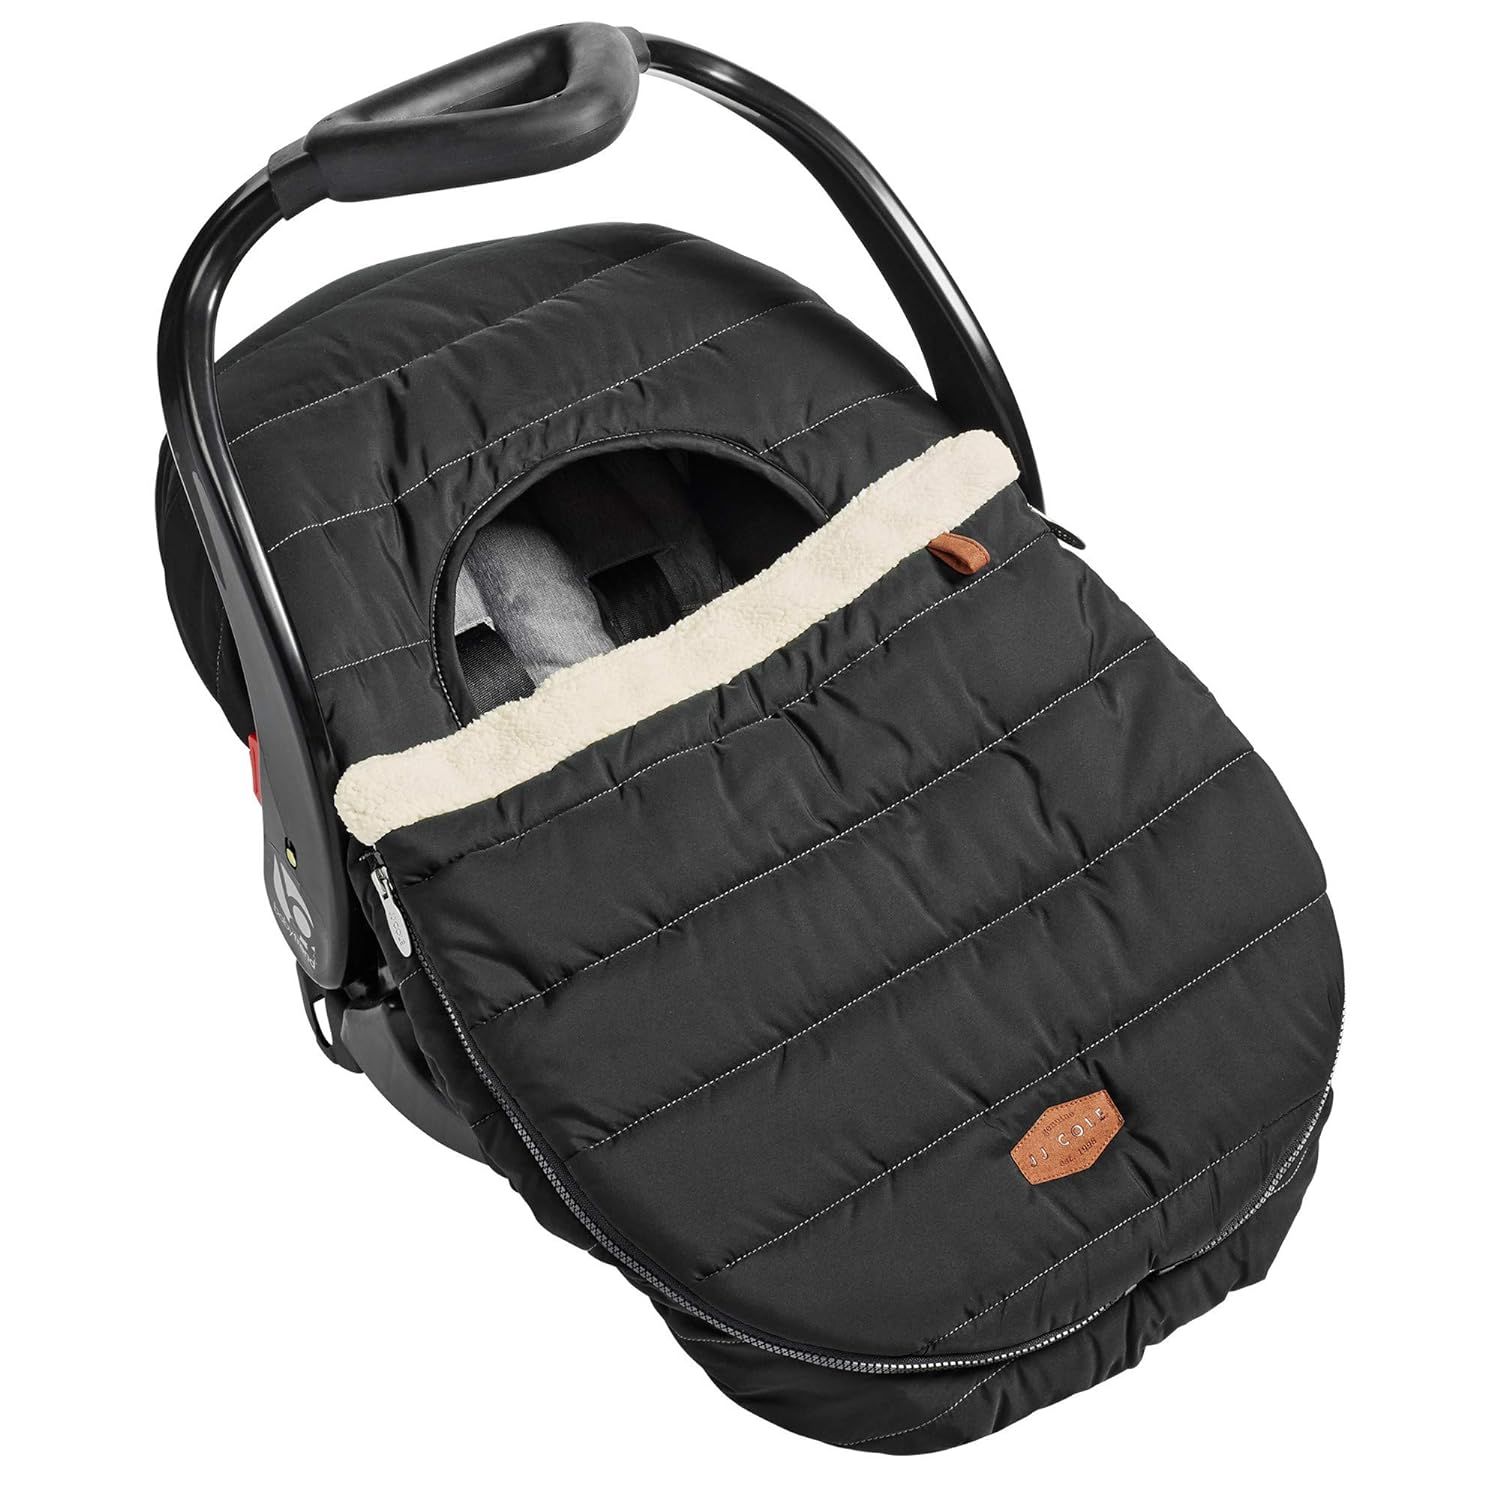 JJ Cole Infant Car Seat Cover, Winter Resistant Stroller and Baby Carrier Cover, Black | Amazon (US)